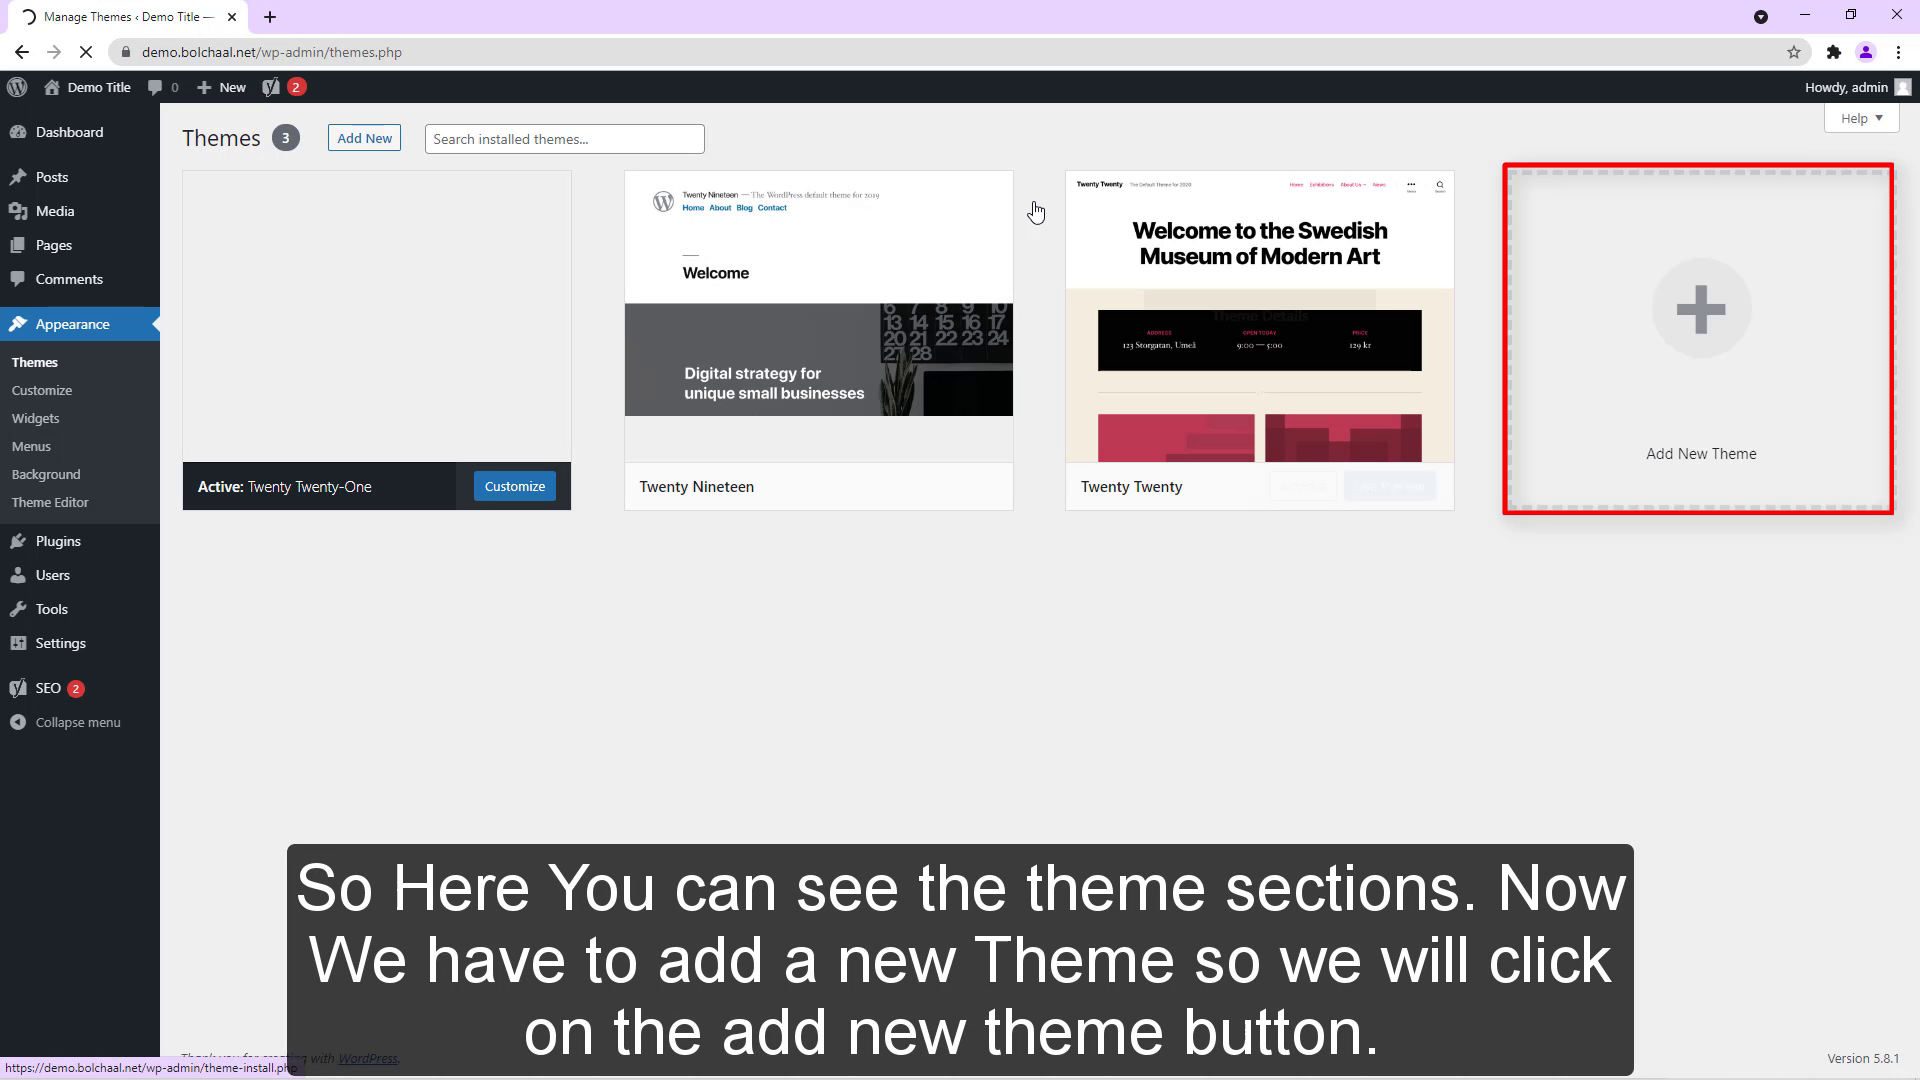 So Here You can see the theme sections